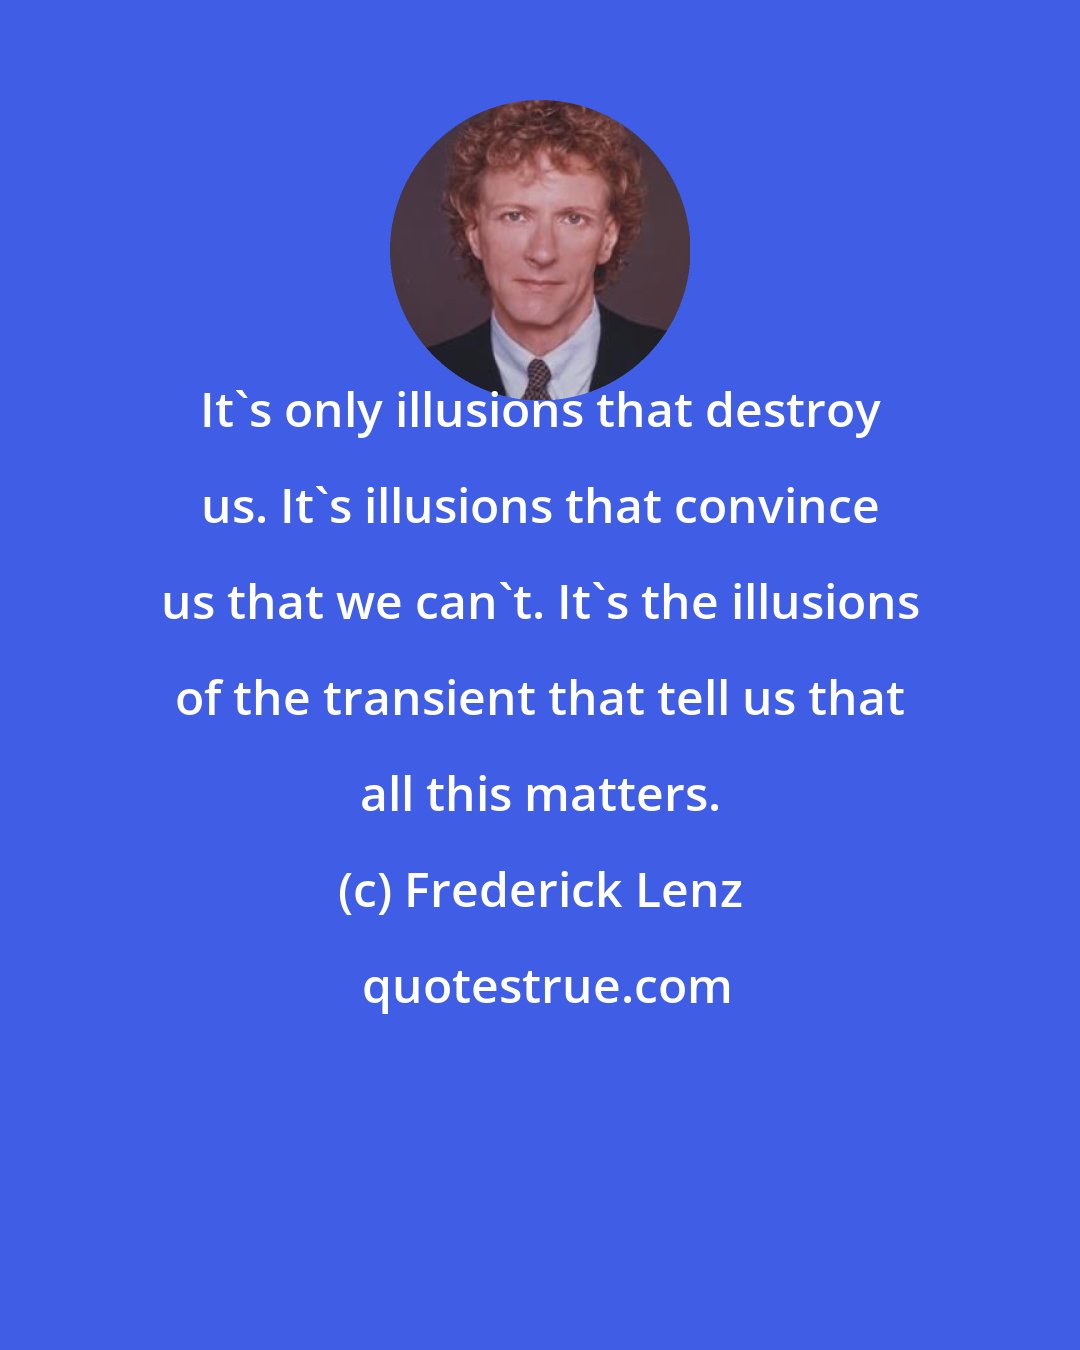 Frederick Lenz: It's only illusions that destroy us. It's illusions that convince us that we can't. It's the illusions of the transient that tell us that all this matters.